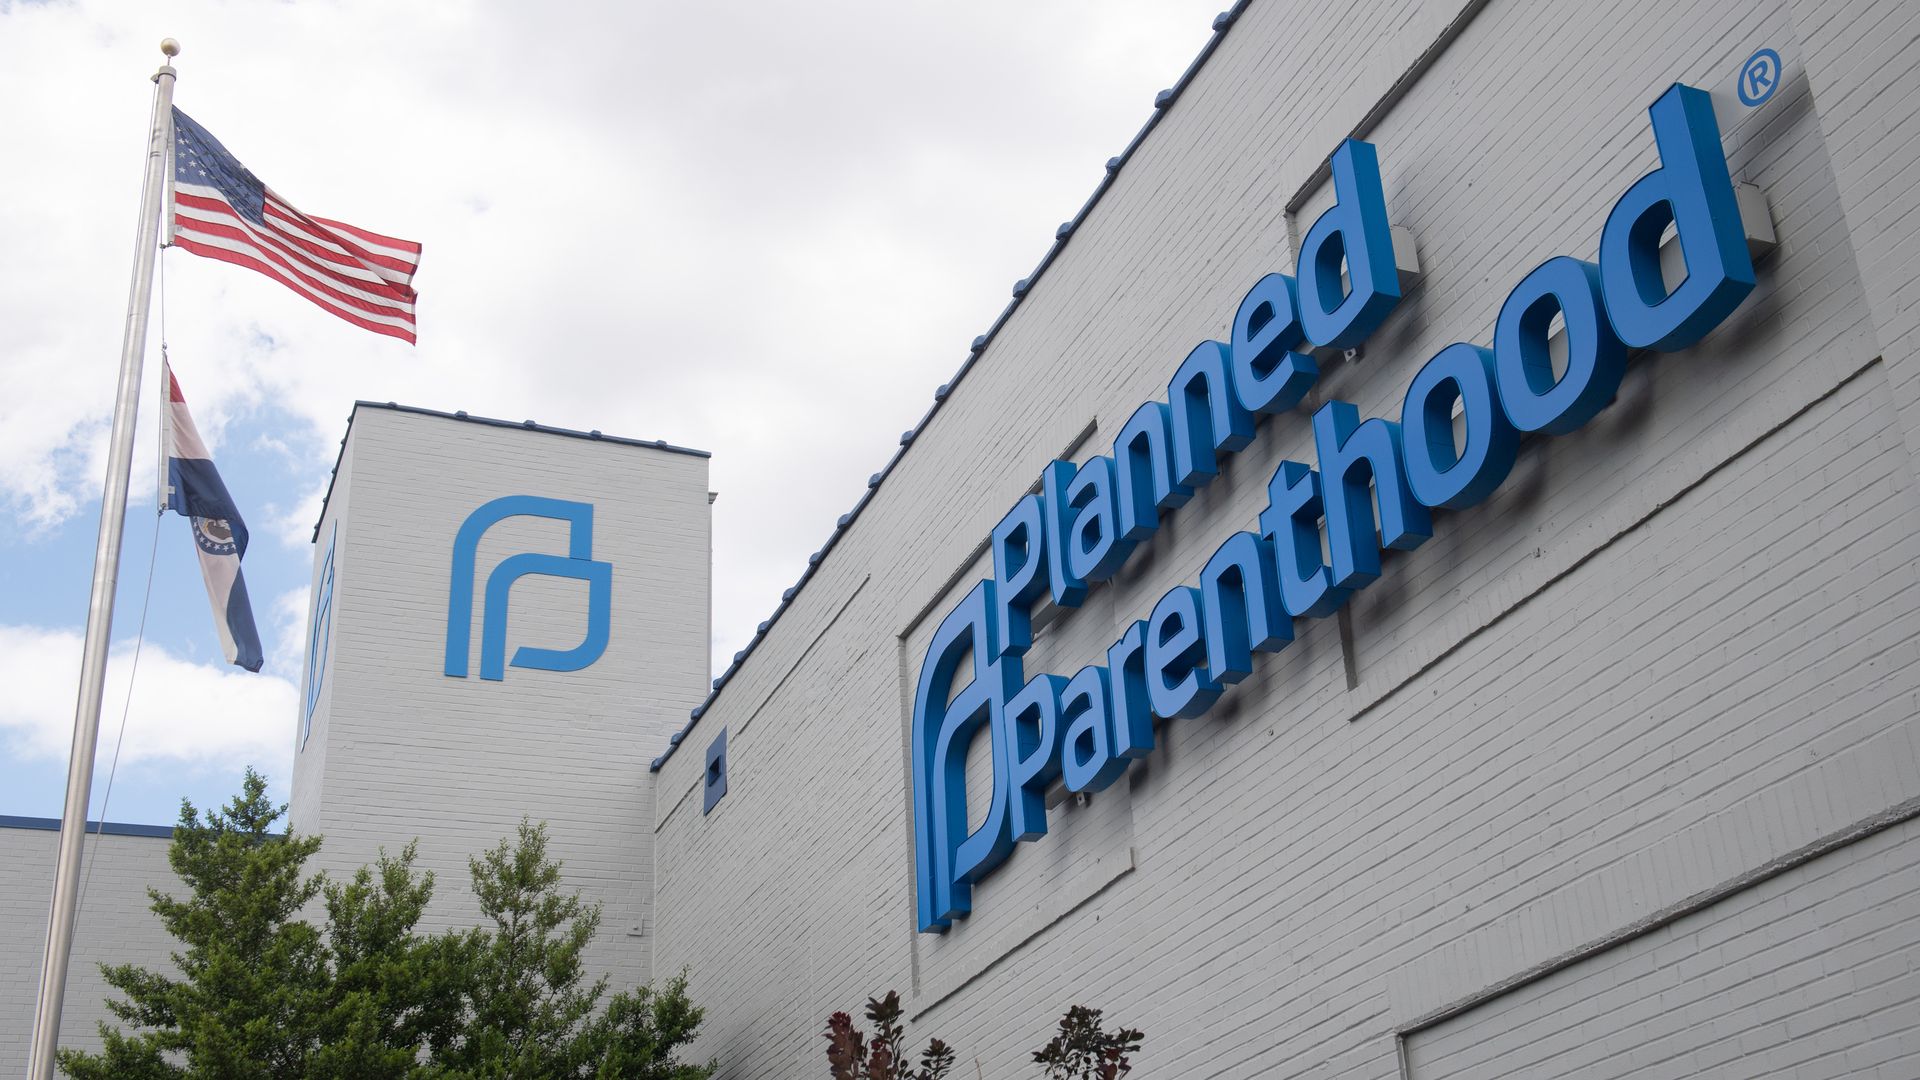 Photo of the exterior of a Planned Parenthood clinic, with its logo in blue and an American flag flying on a flagpole nearby